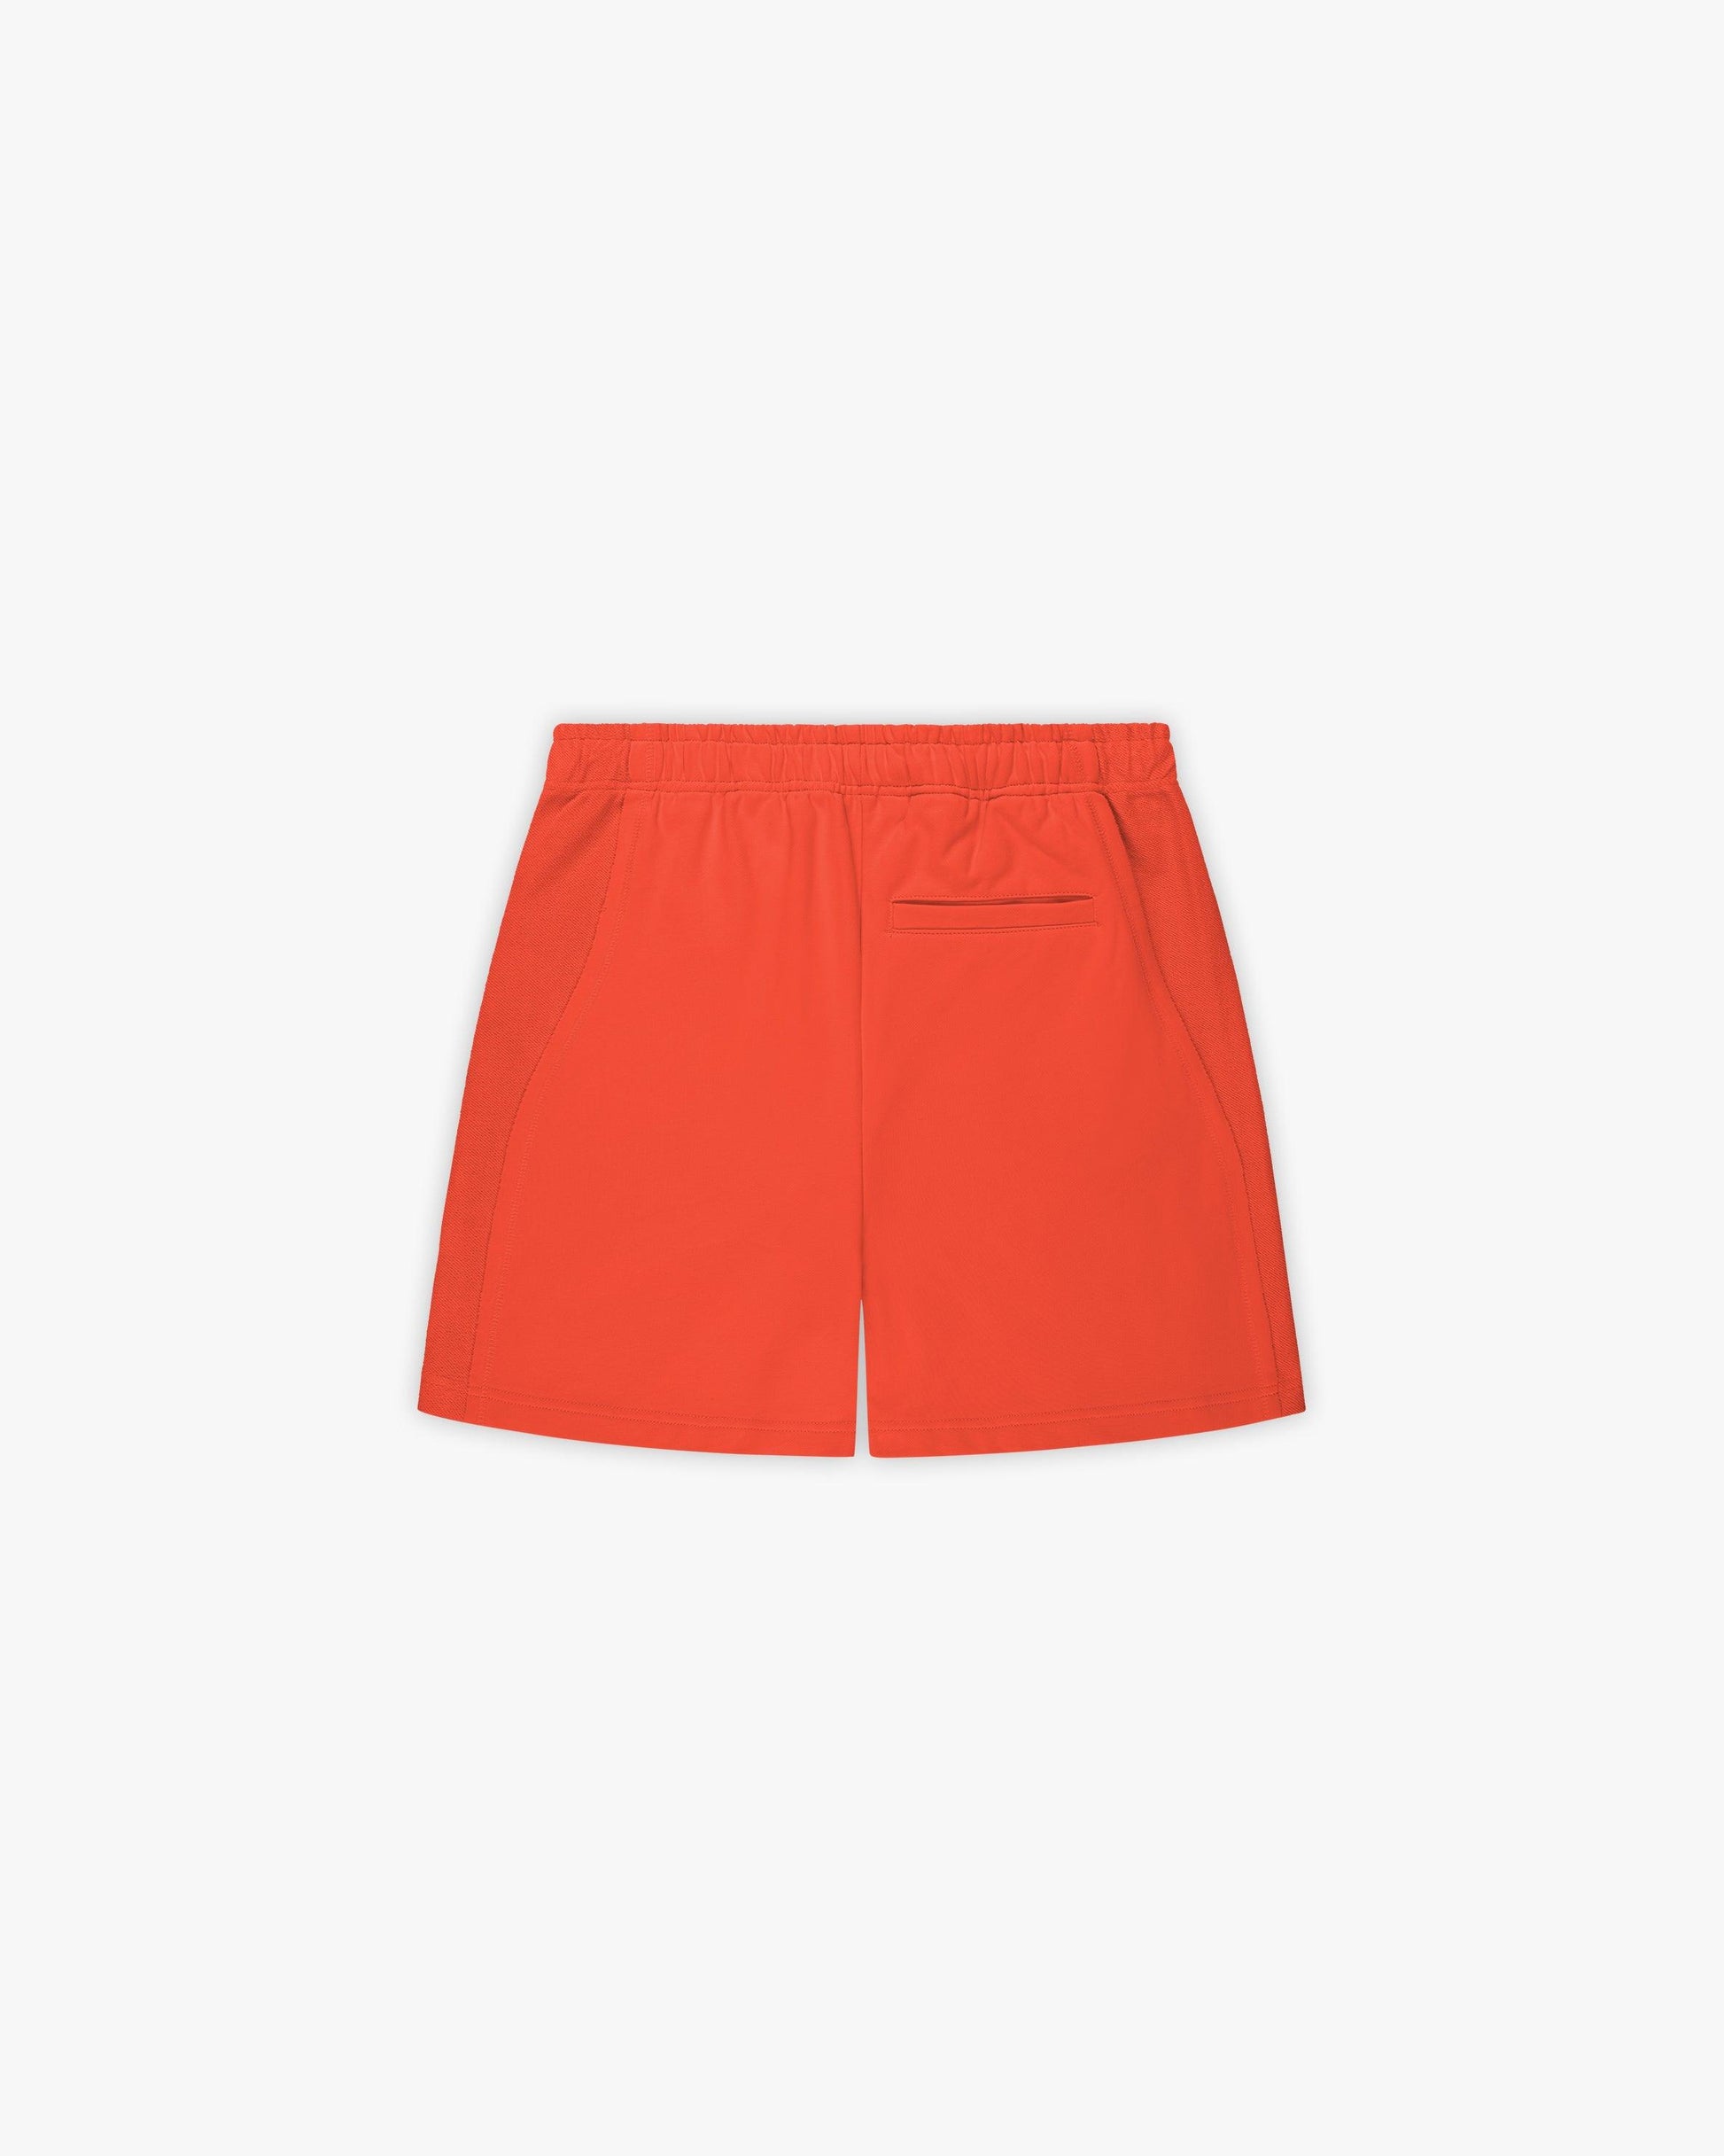 INSIDE OUT SHORTS STRAWBERRY - VICINITY